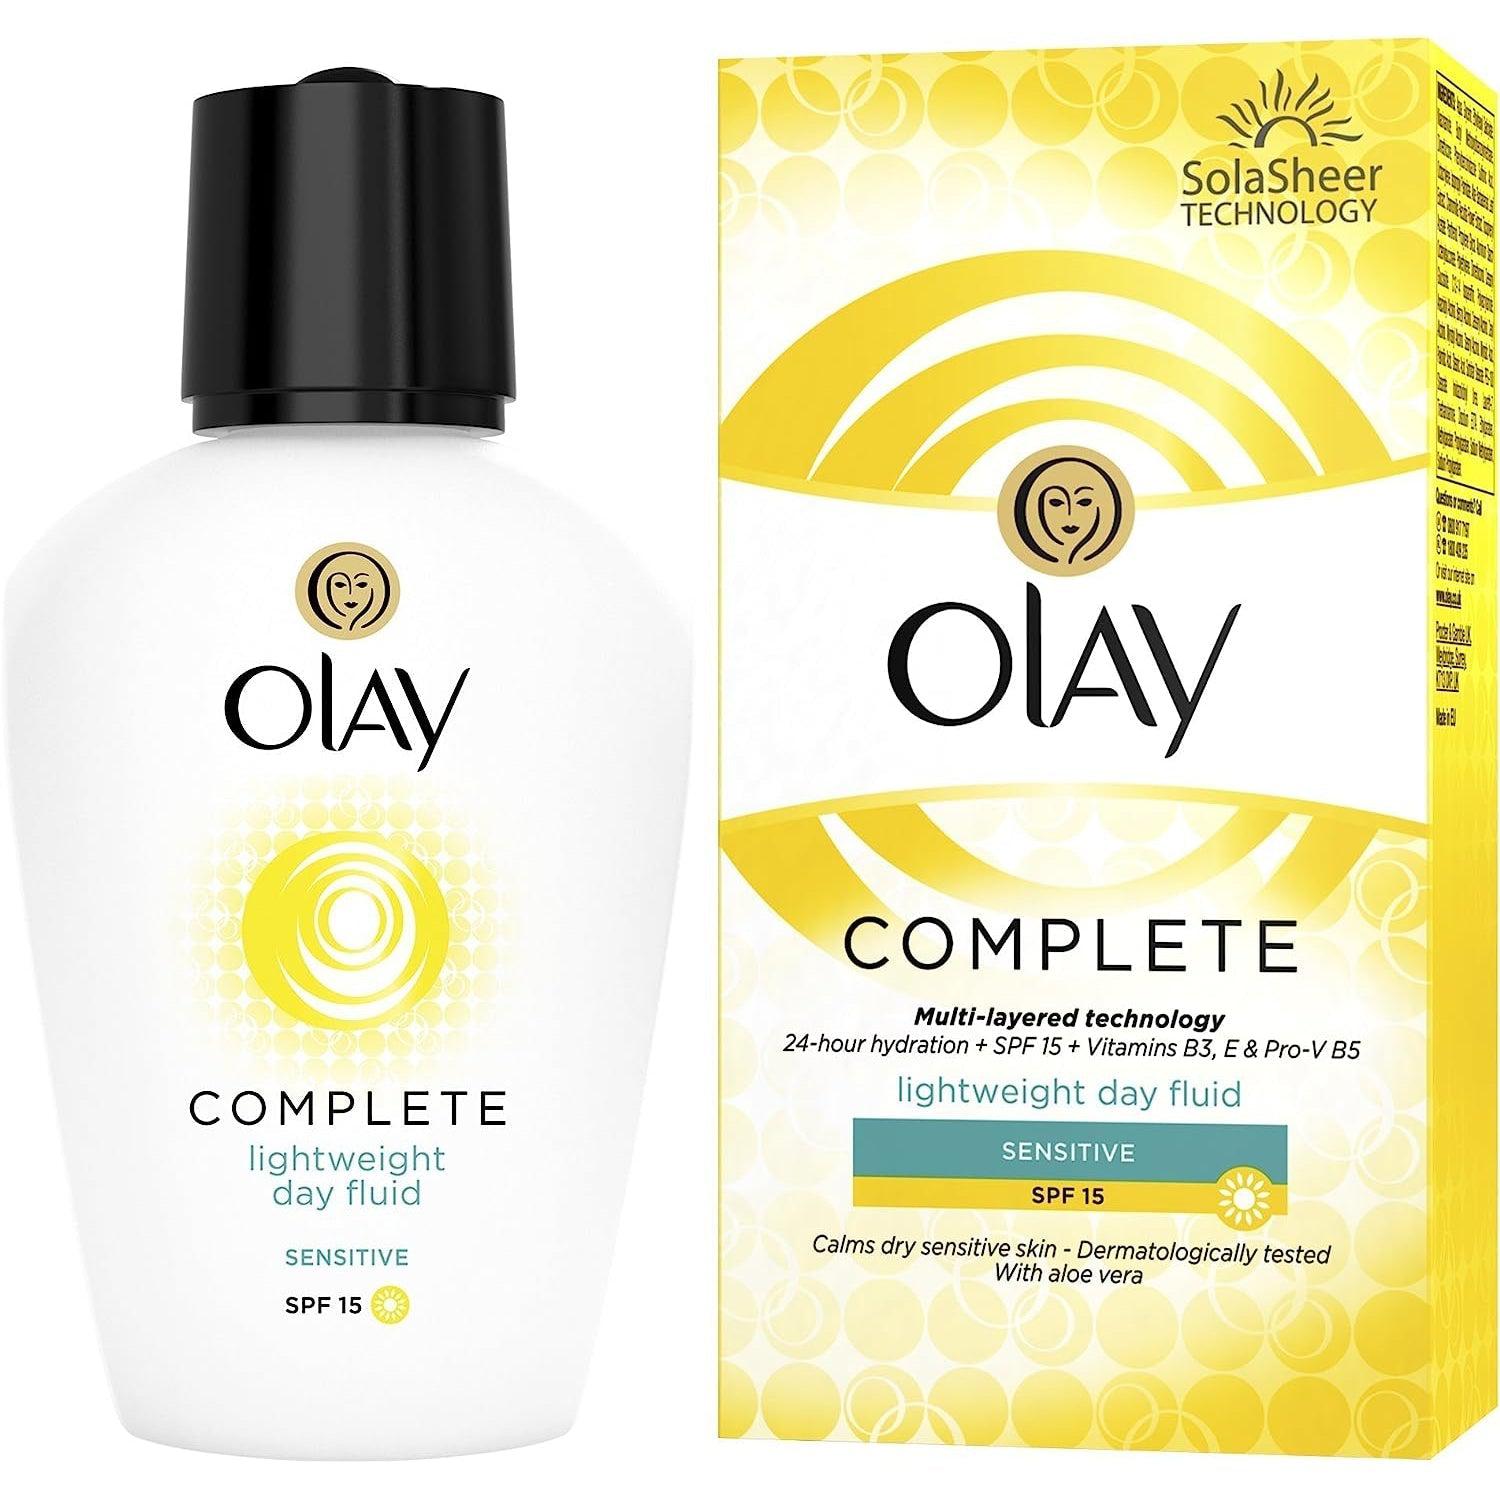 Olay Complete Sensitive SPF 15 Light Weight Day Lotion 100ml - Healthxpress.ie